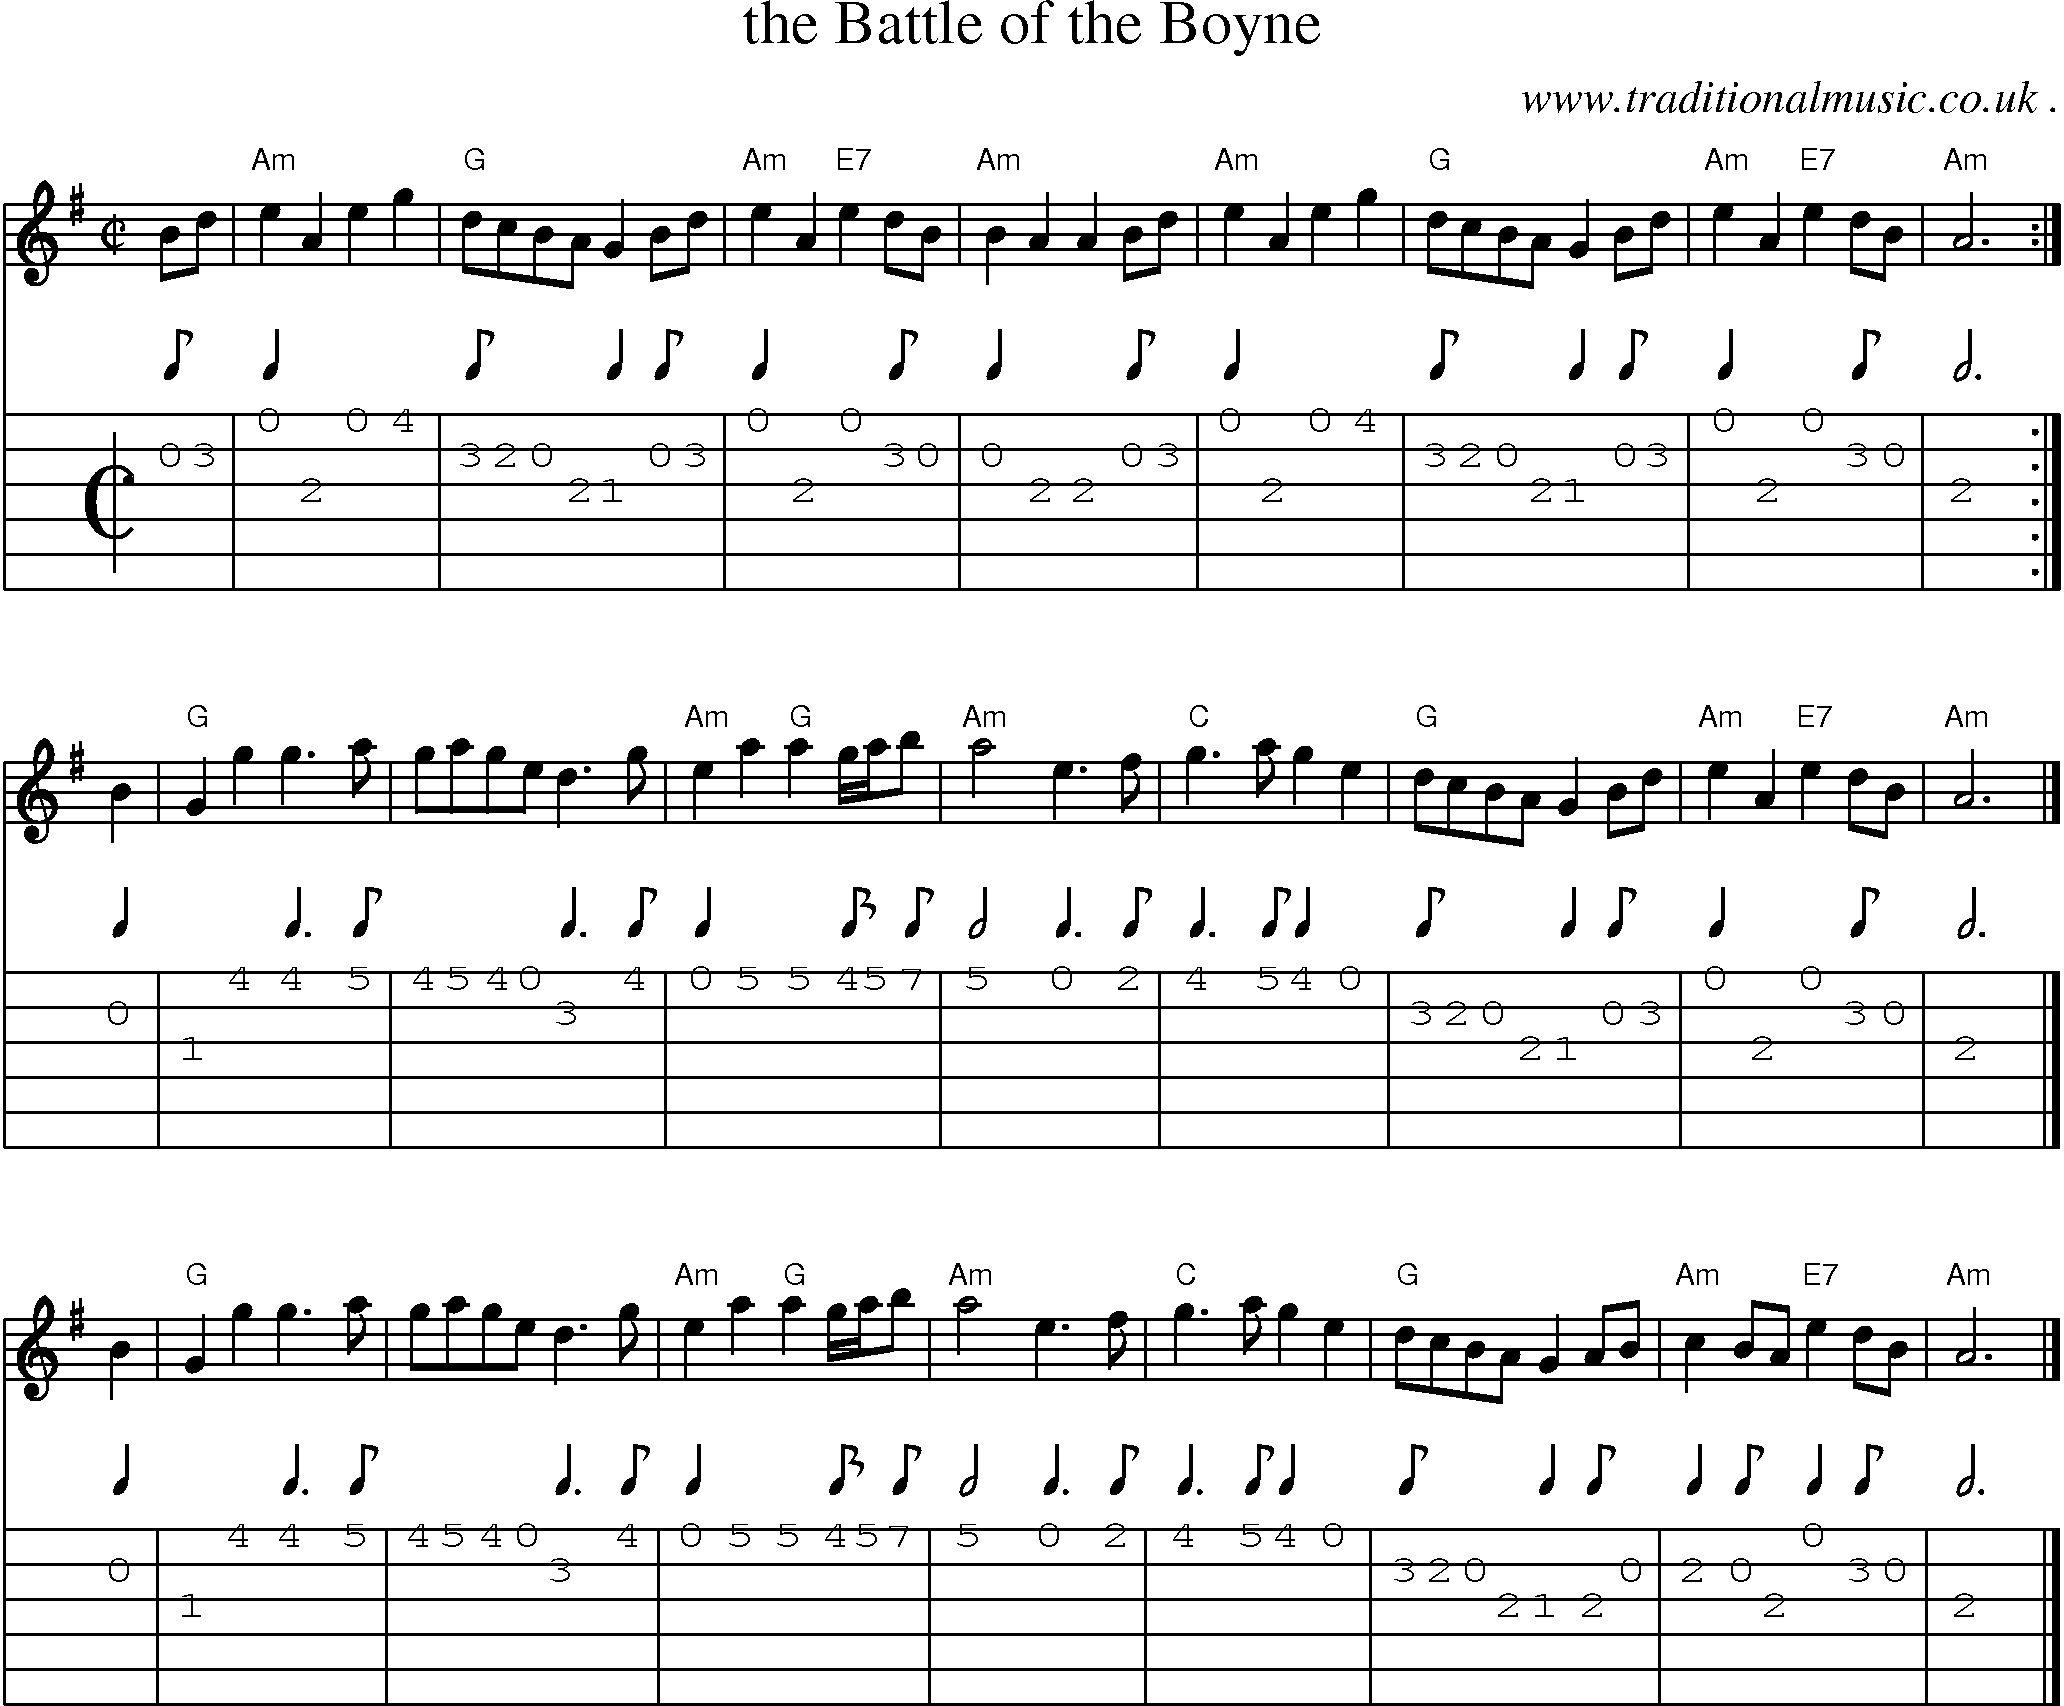 Sheet-music  score, Chords and Guitar Tabs for The Battle Of The Boyne